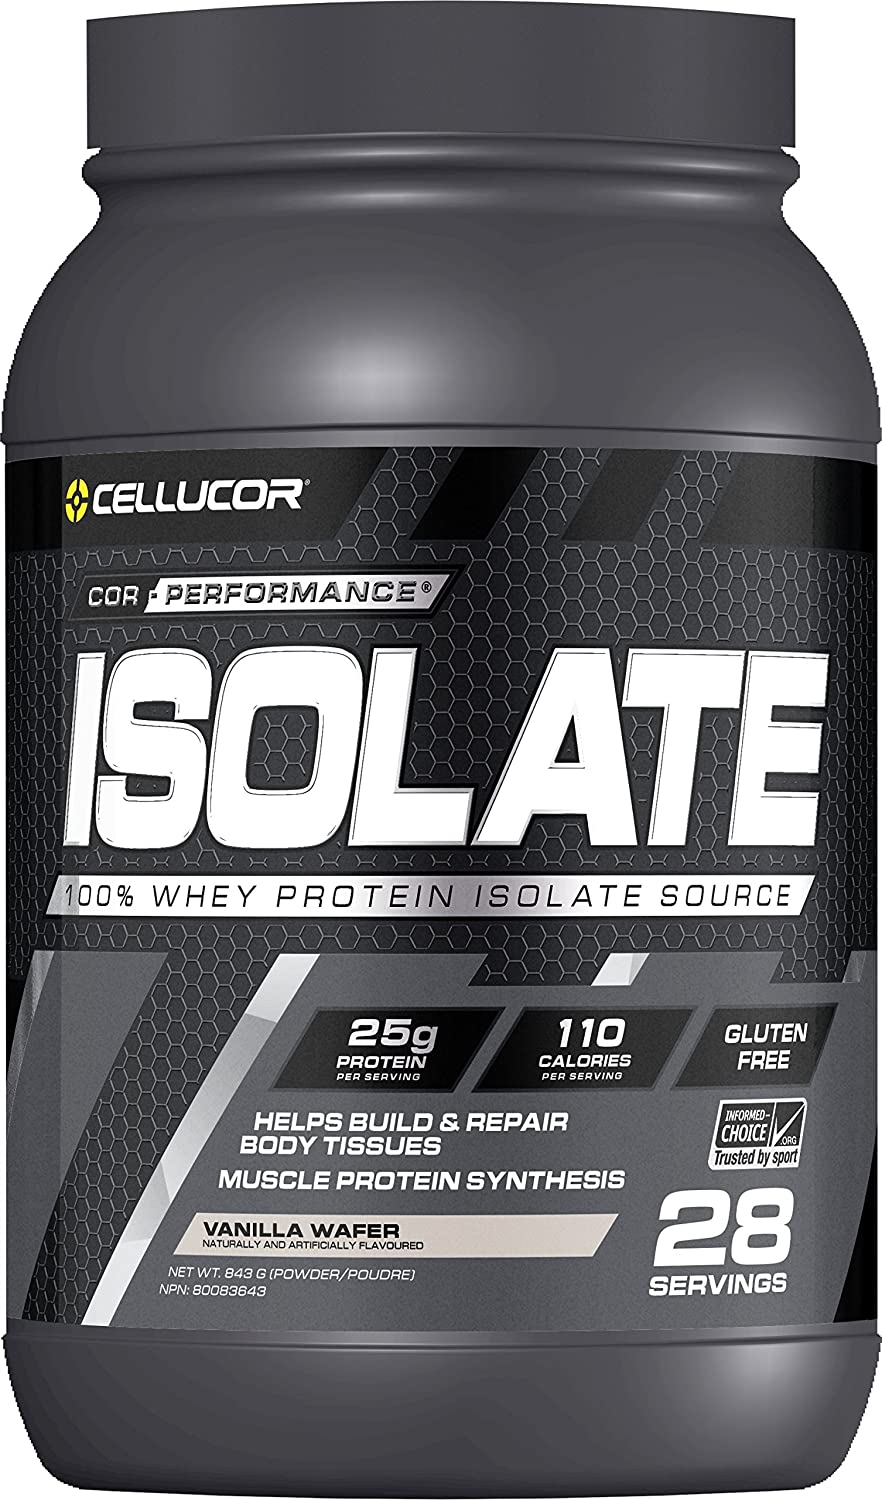 CELLUCOR Cor-Performance Whey Isolate 2lbs 28 Servings, Fudge Chocolate Brownie, SNS Health, Sports Nutrition